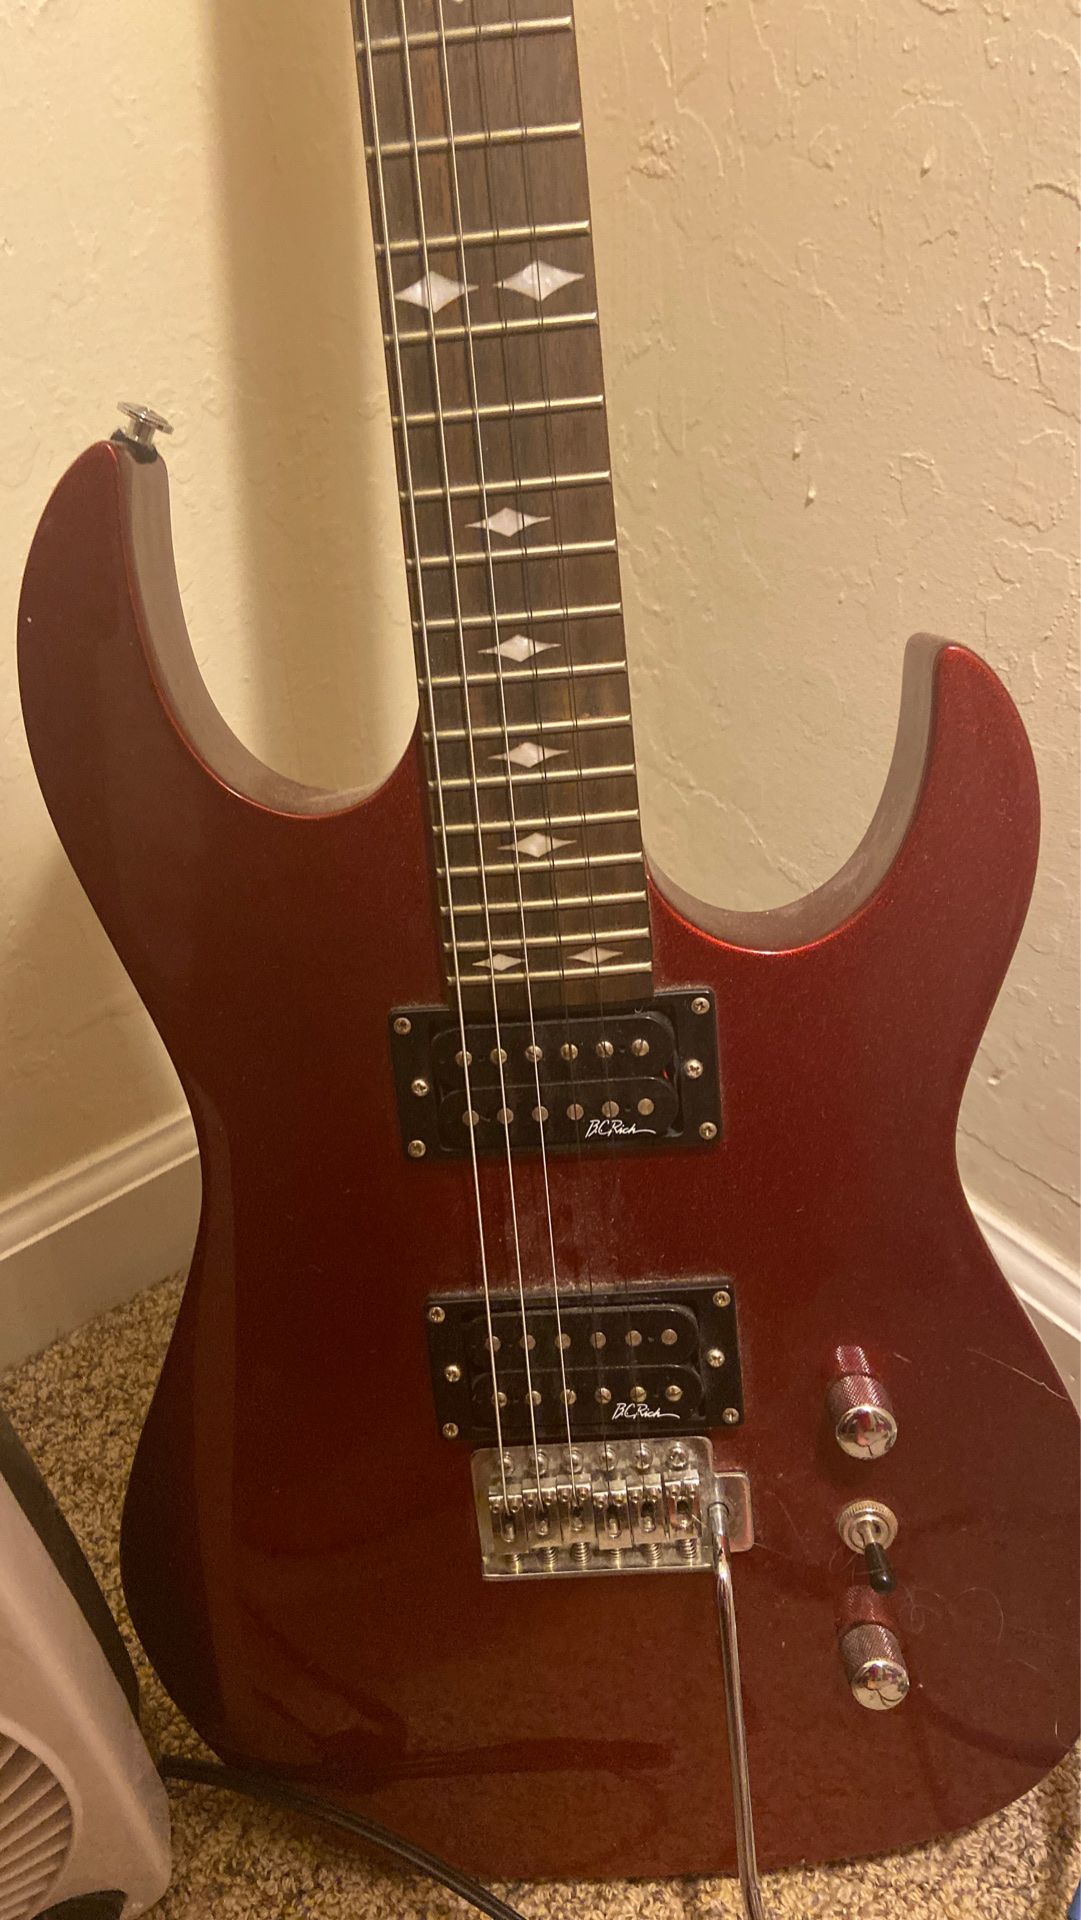 Electric guitar( has a couple scratches)(needs new string)